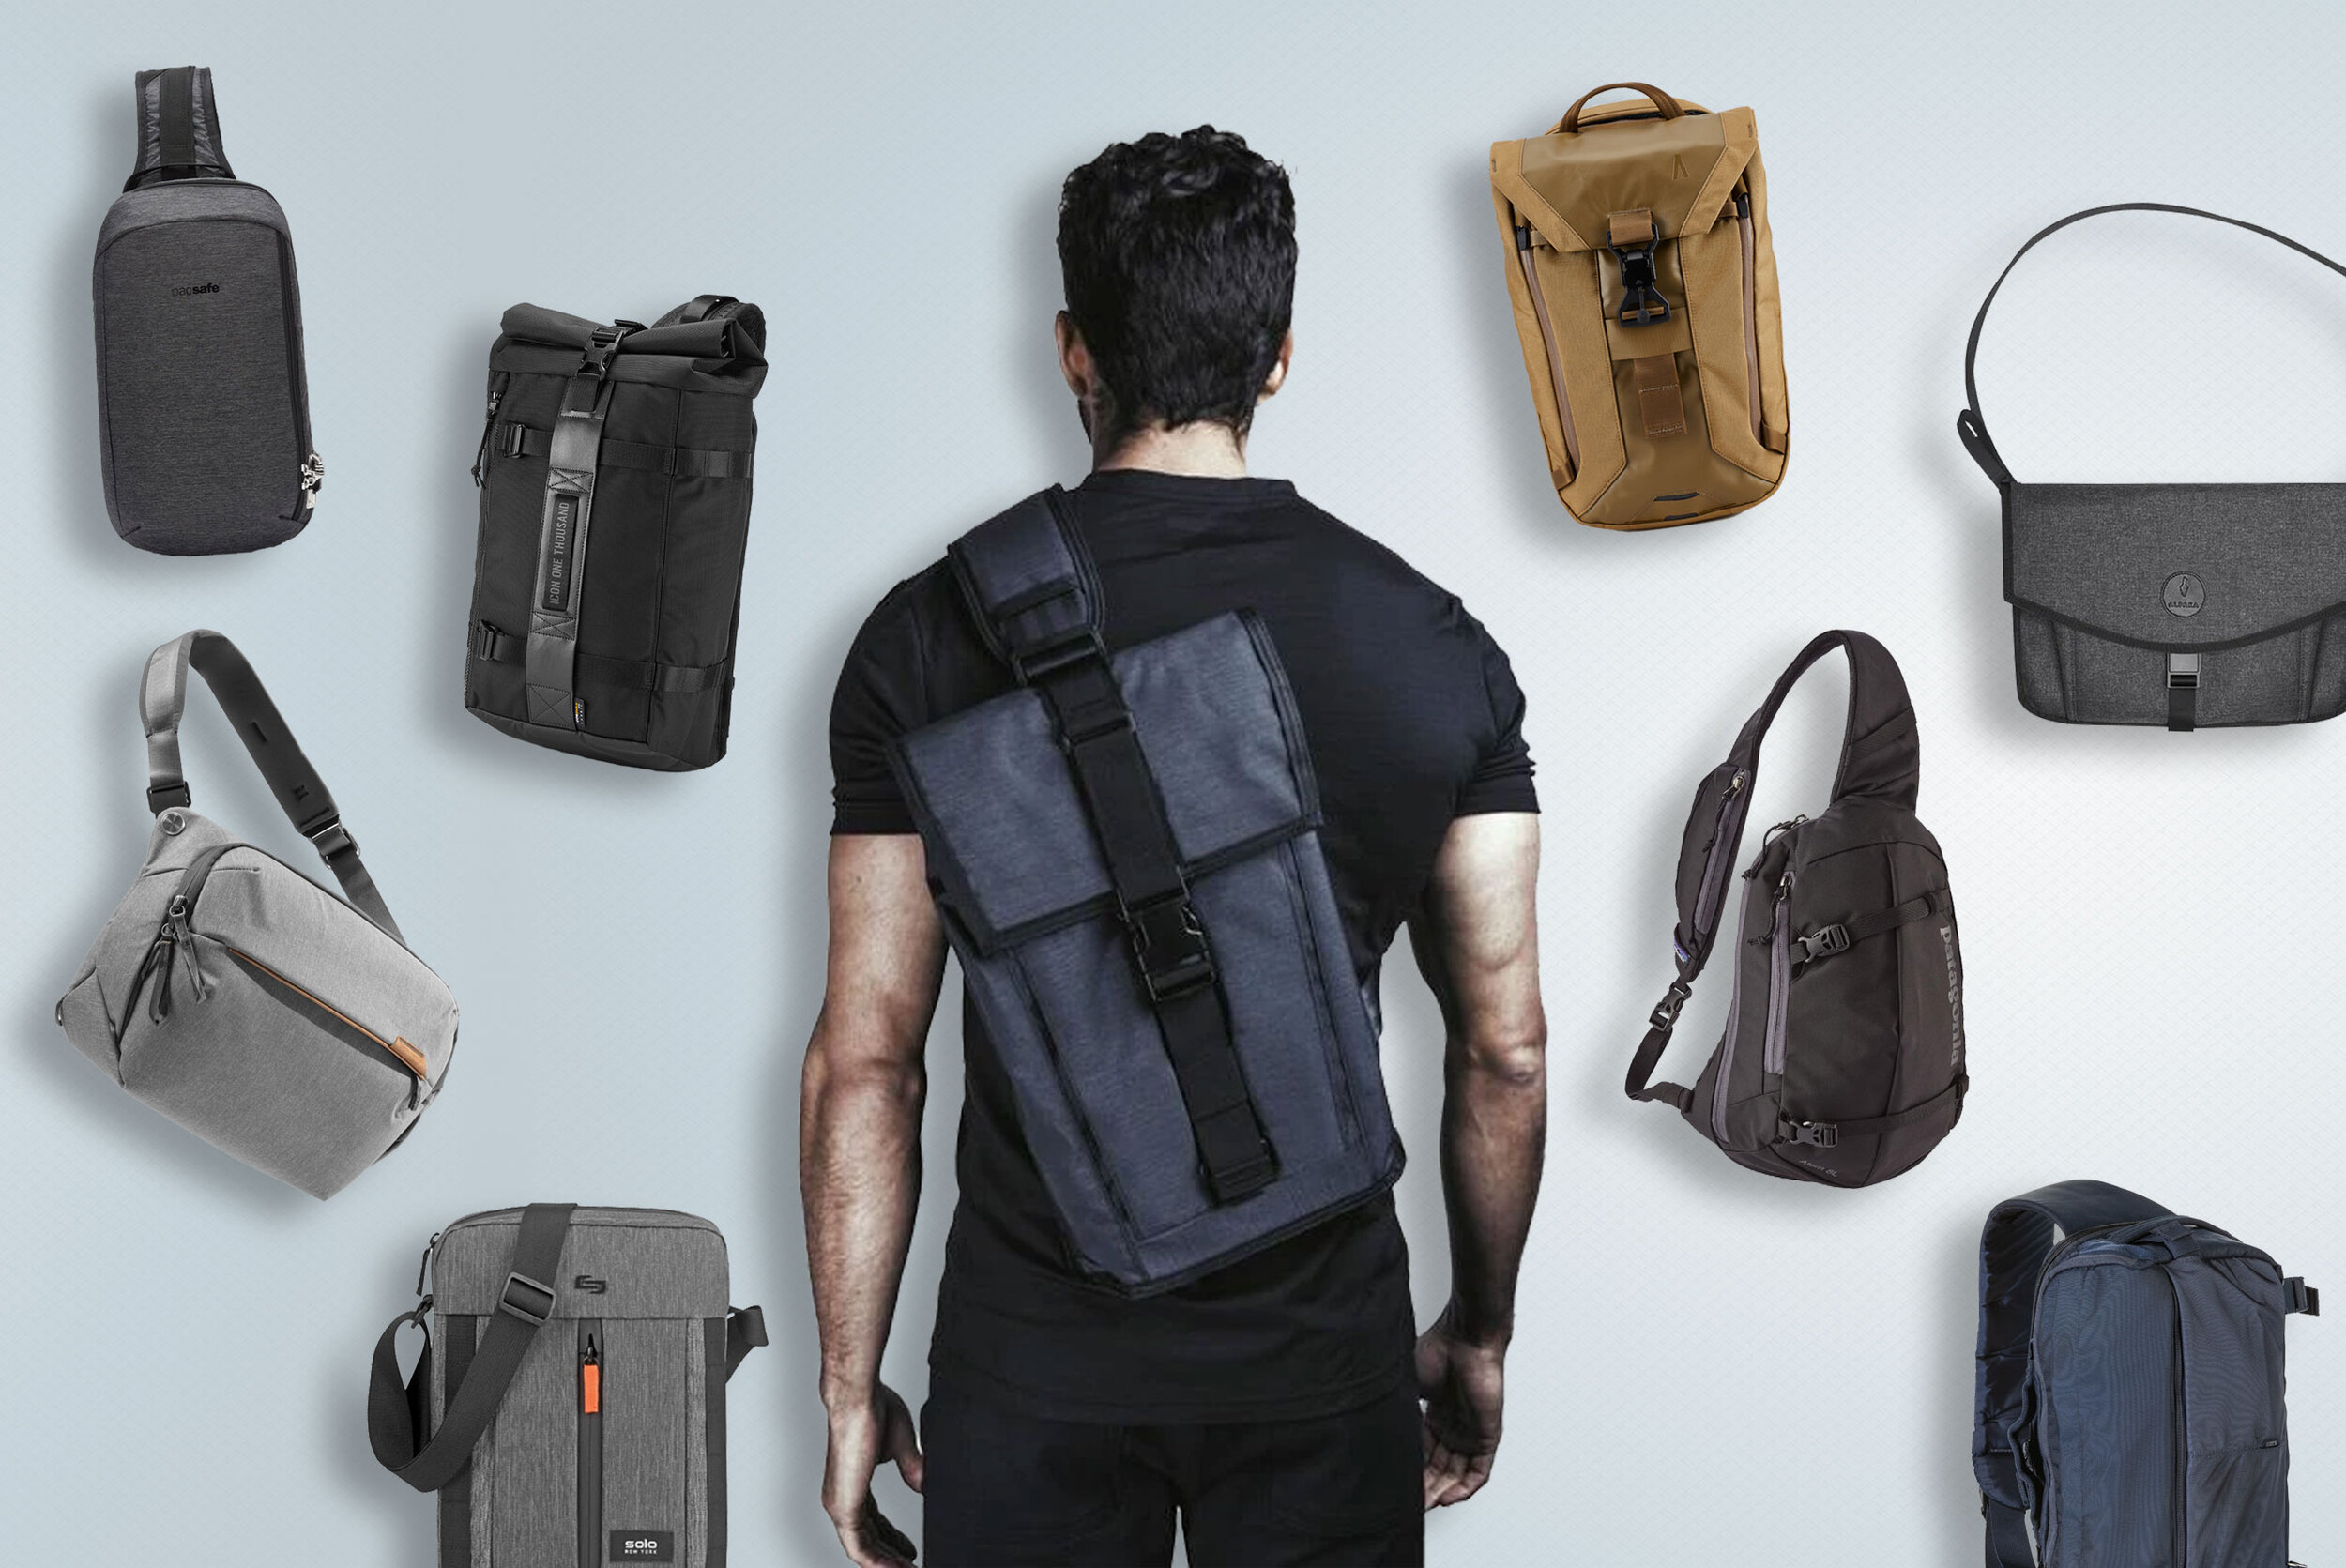 The Best Messenger Bags for Tech Travel and EDC 2022  Carryology   Exploring better ways to carry